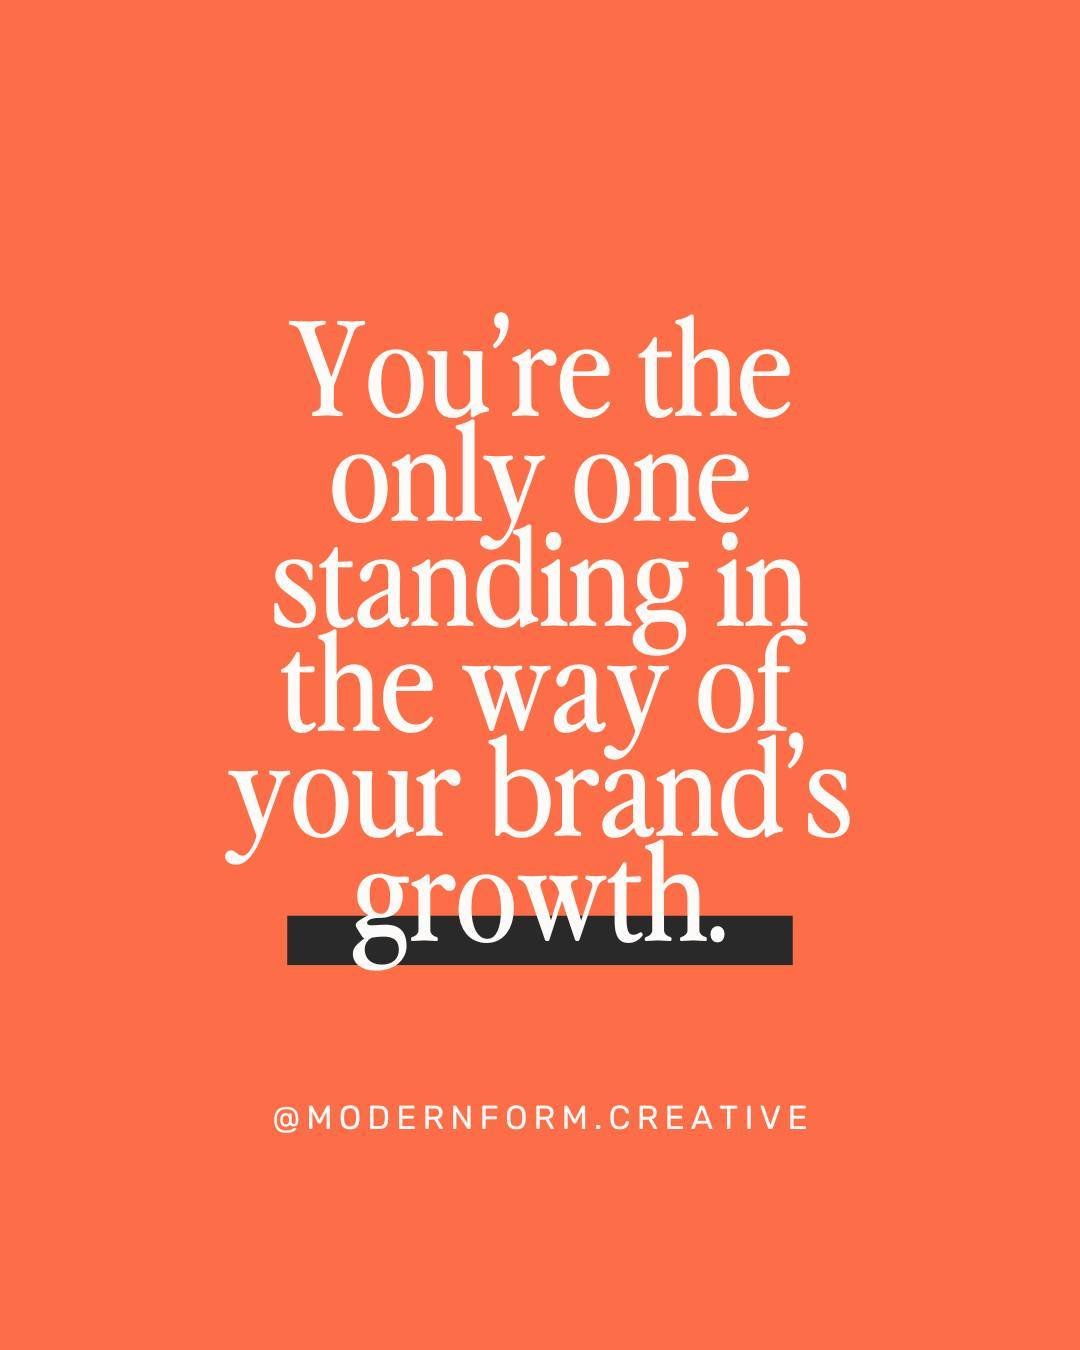 You&rsquo;re the only one standing in the way of your brand&rsquo;s growth.⁠
⁠
Let me explain&hellip;⁠
⁠
Are you wondering why your small business isn't experiencing the growth you envisioned? Perhaps you haven't invested in a solid brand identity or